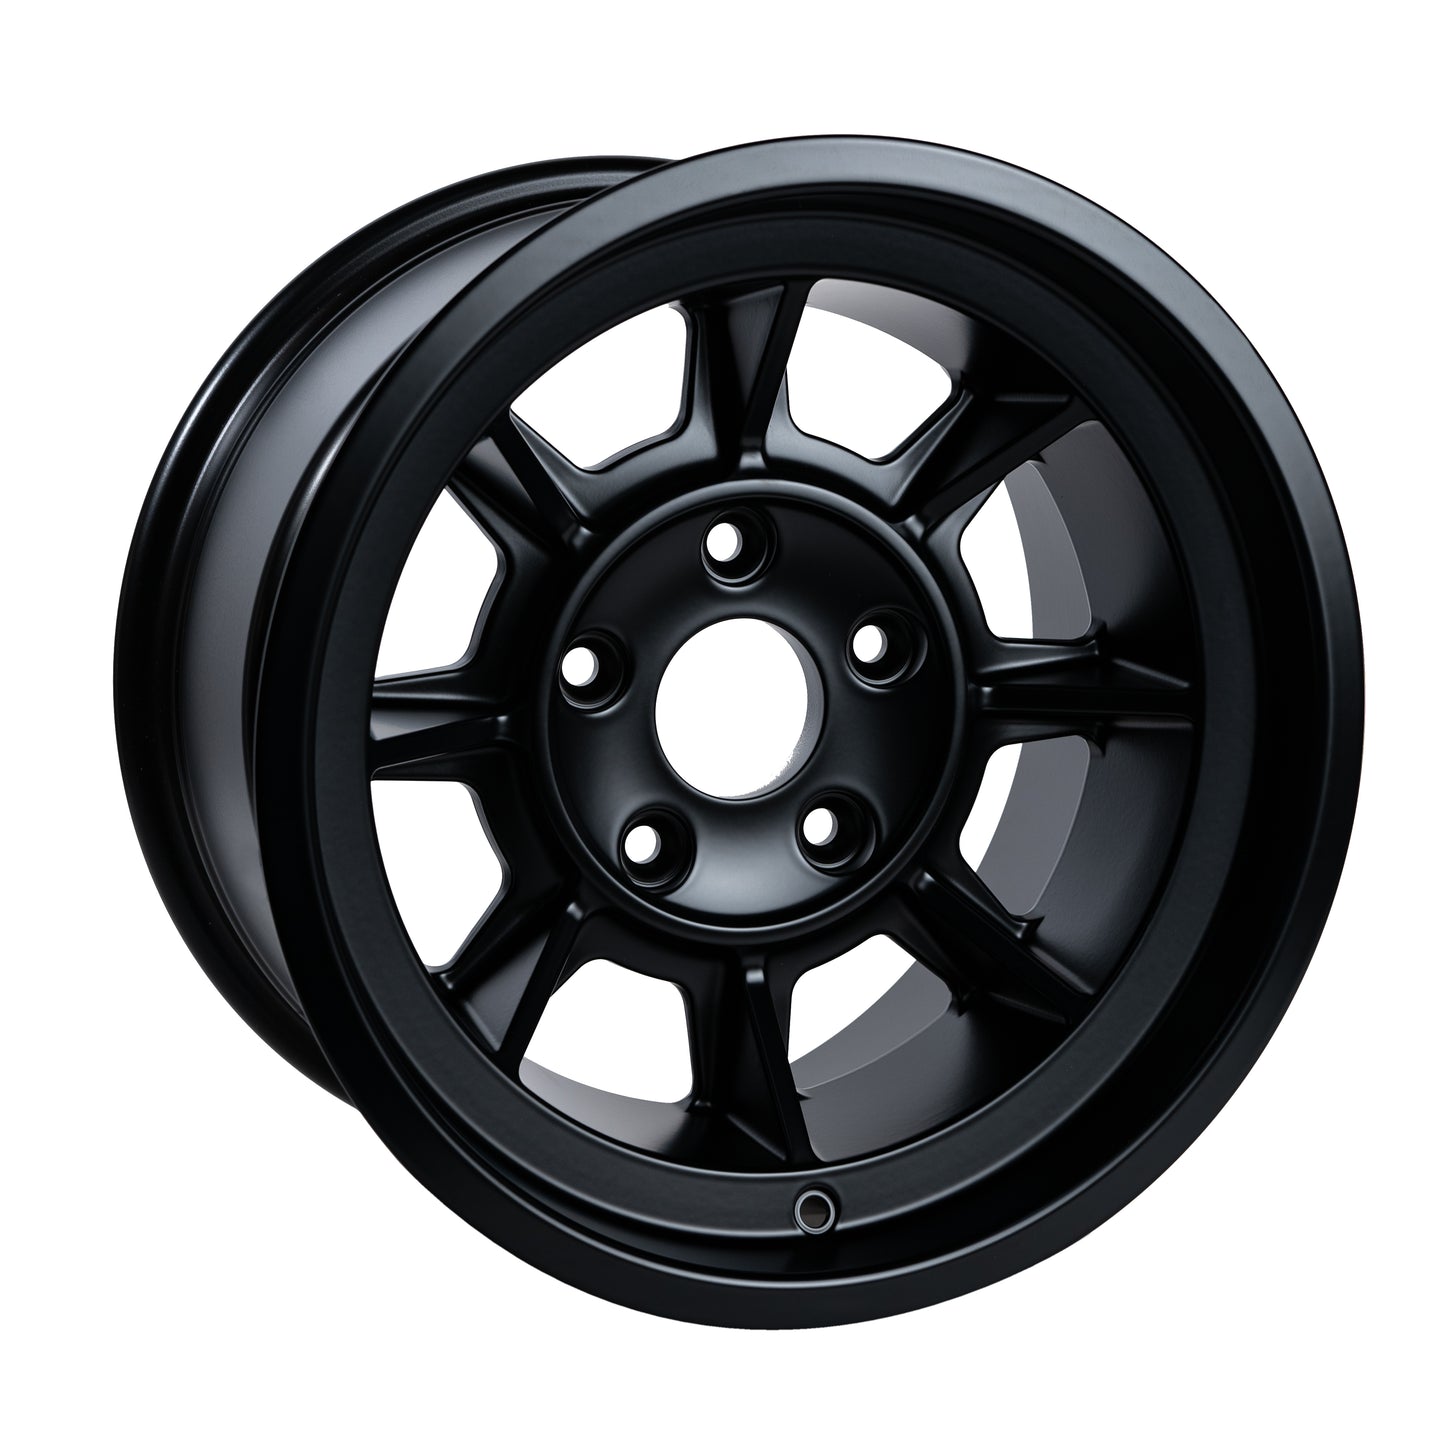 PAG1690 Satin Black 16 x 9" Alloy Wheels - Sierra Madre Collection